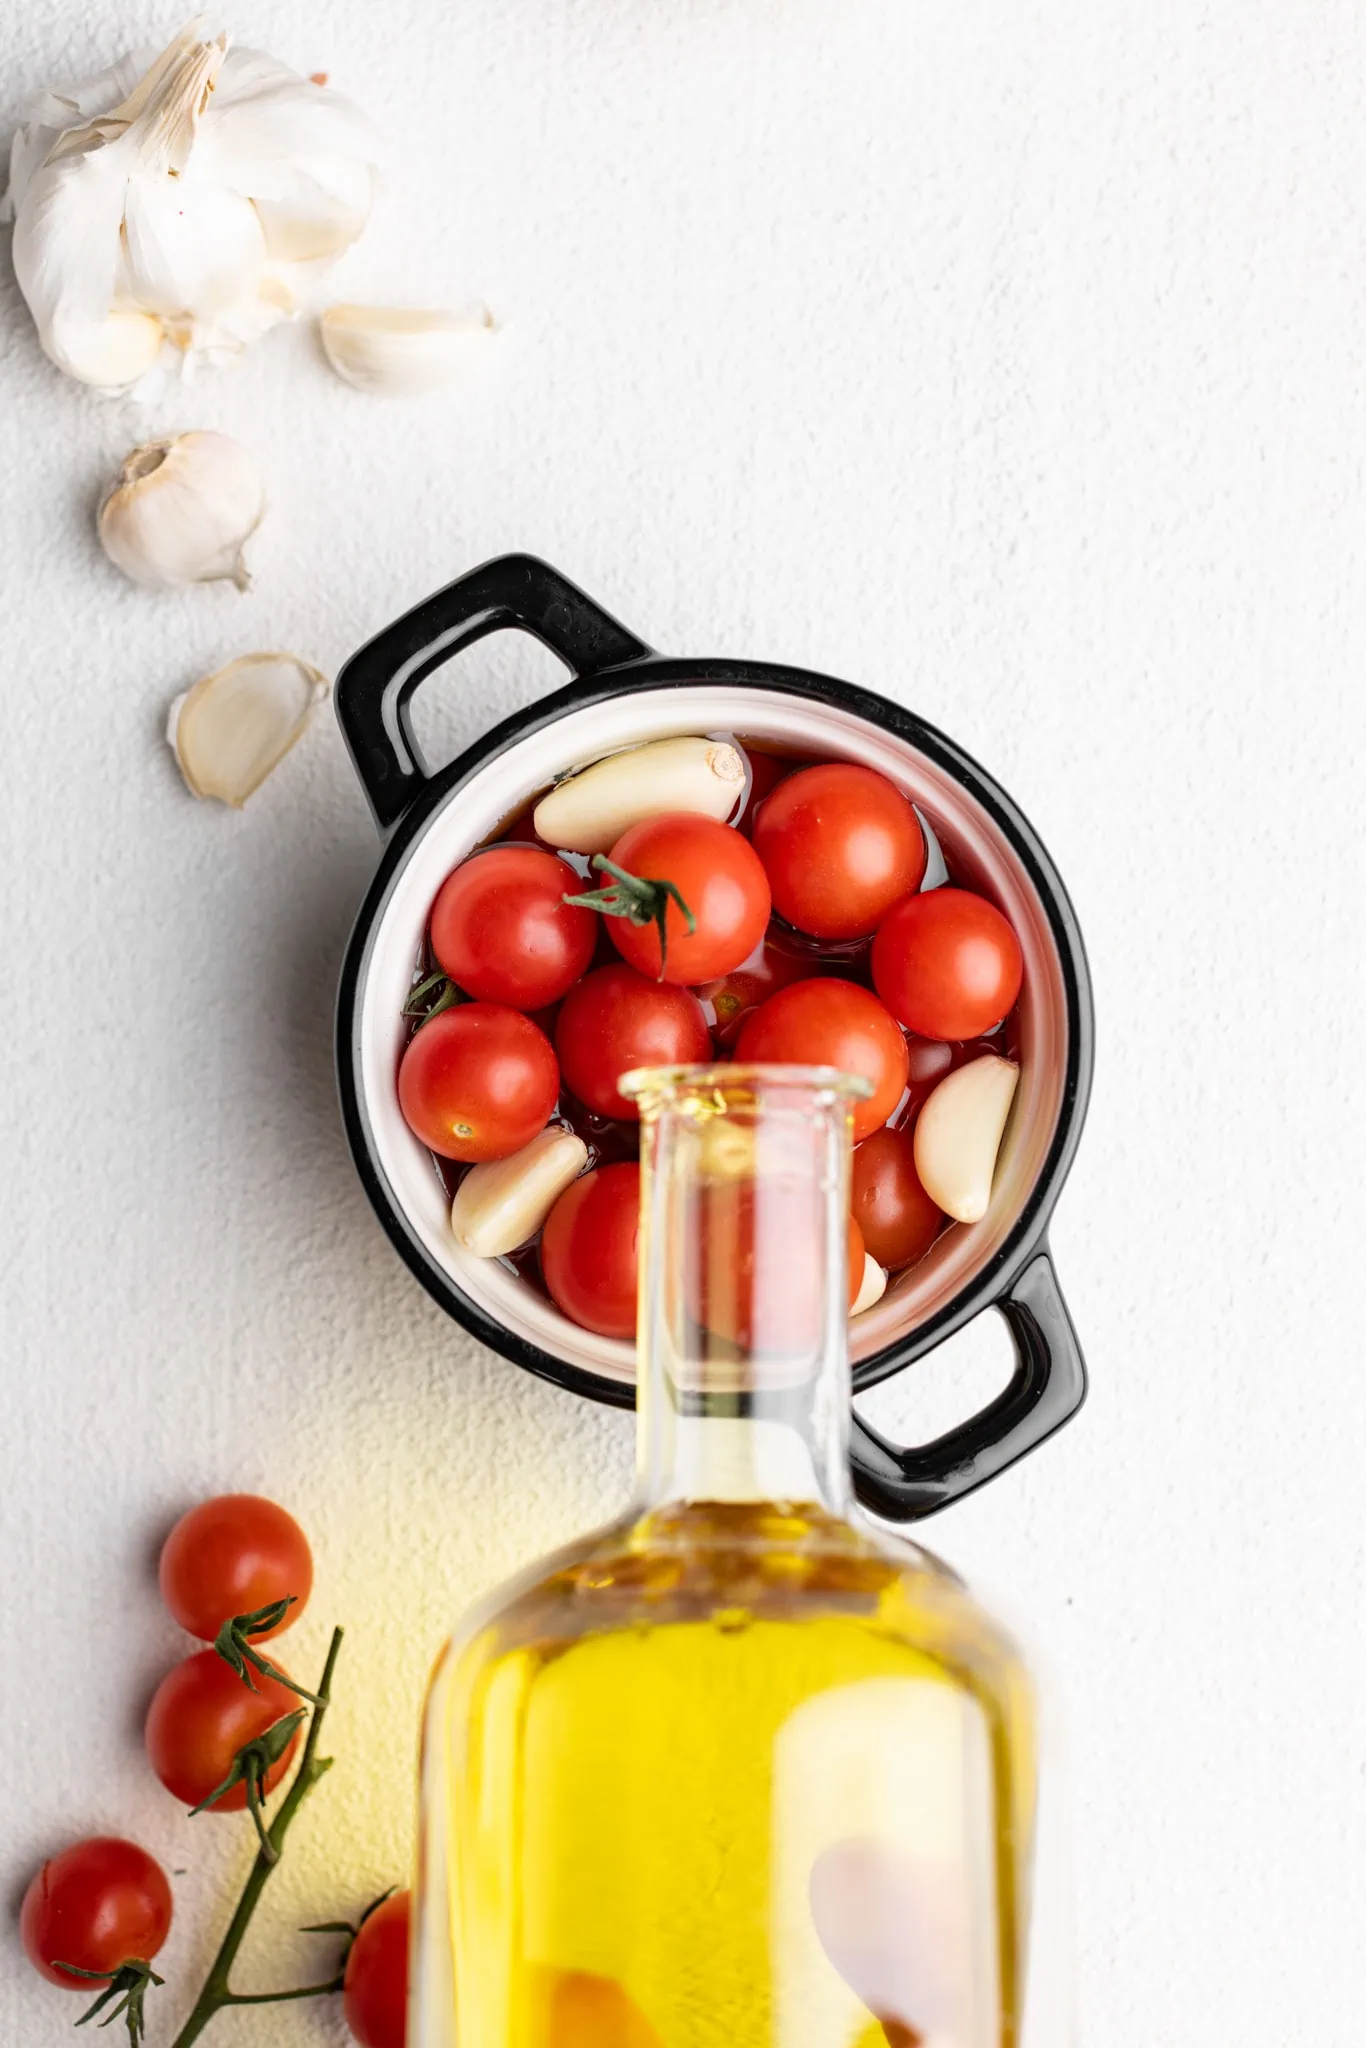 pouring oil in a croquette with cherry tomatoes and garlic.